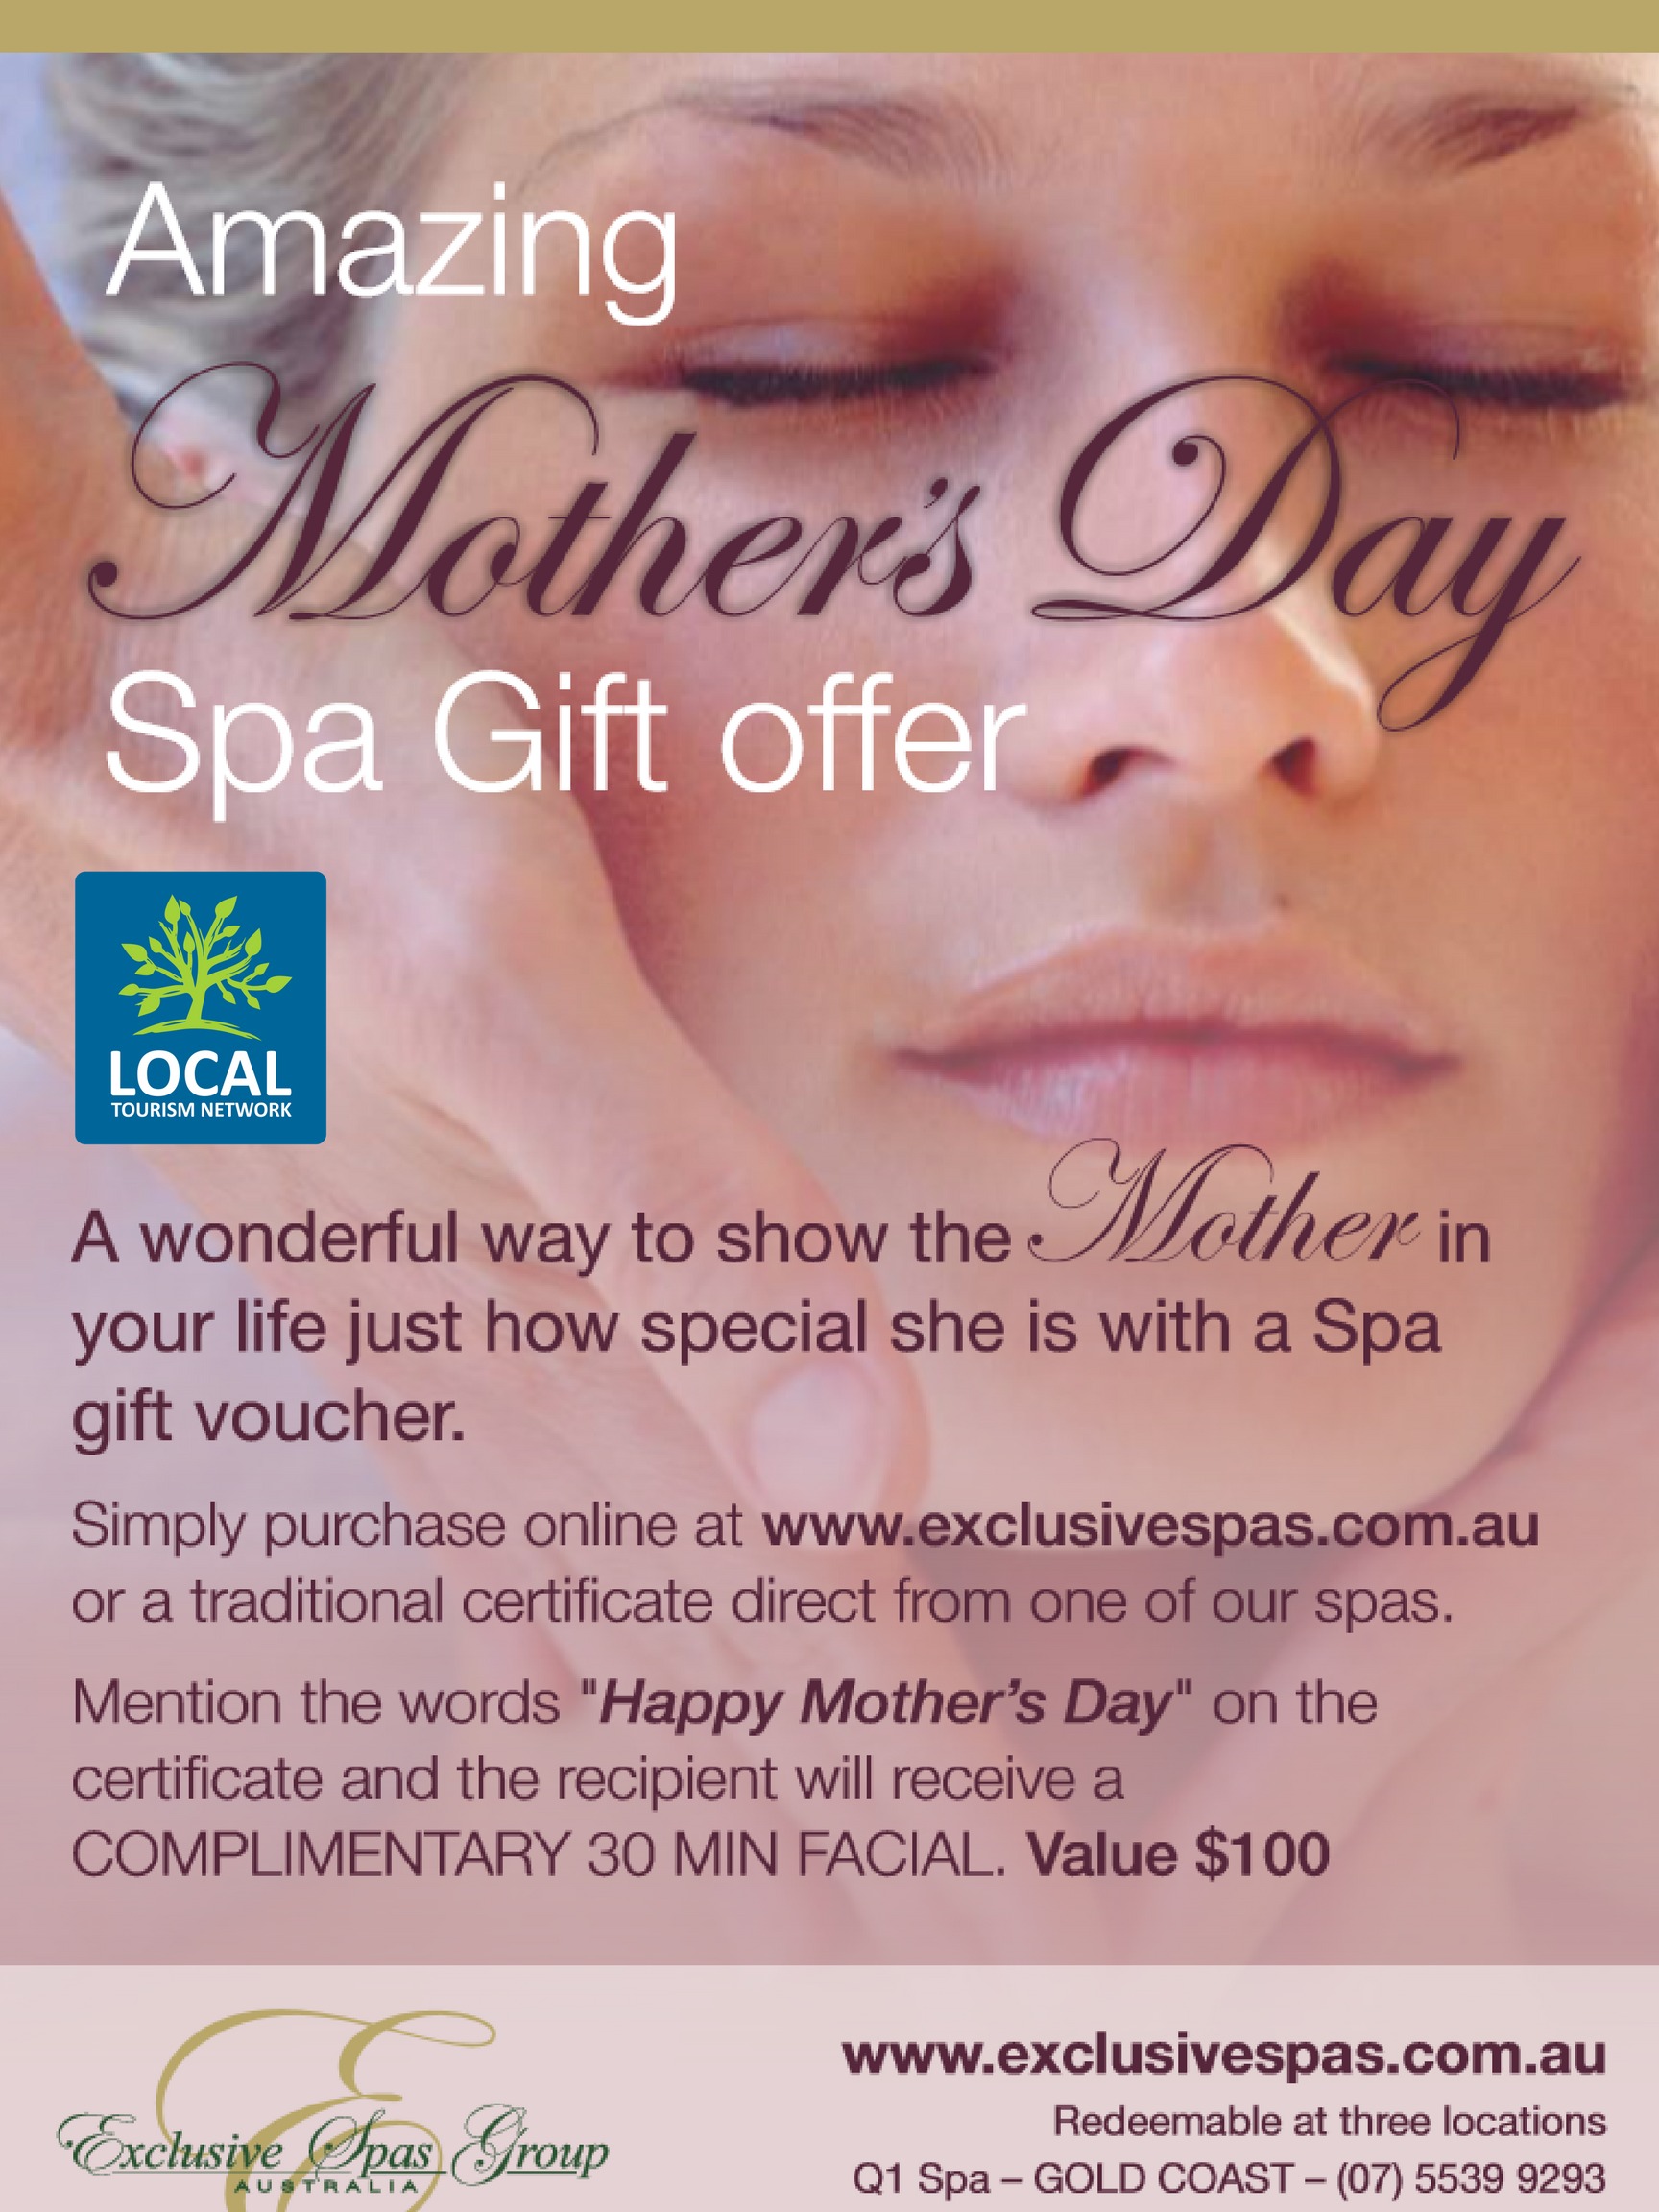 Cairns Events Event Details Amazing Mothers Day Spa T Offer Complimentary 30 Min Facial